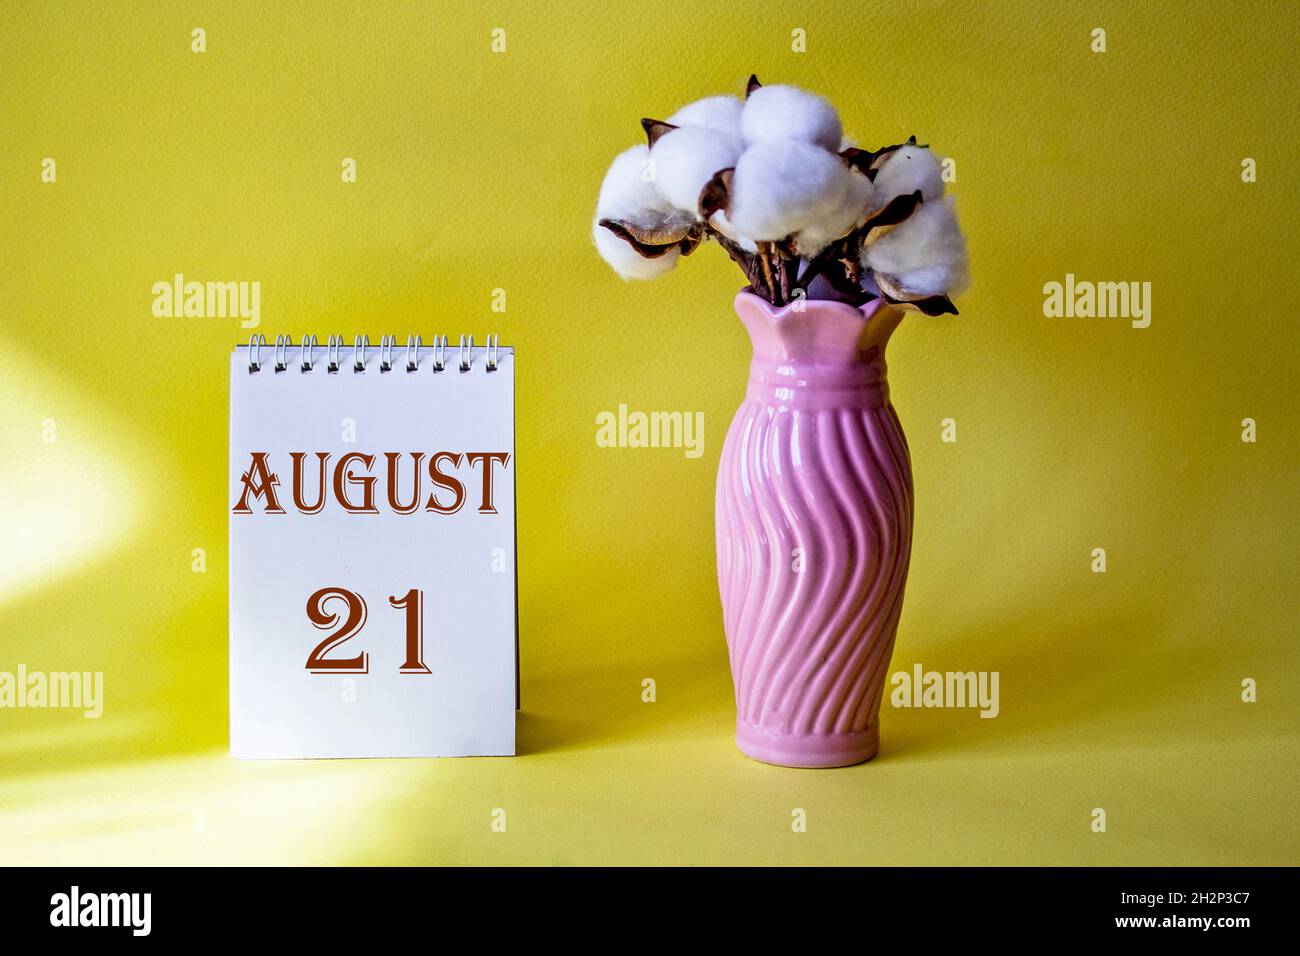 Calendar with text 21 august on yellow background and with a vase of flowers Stock Photo